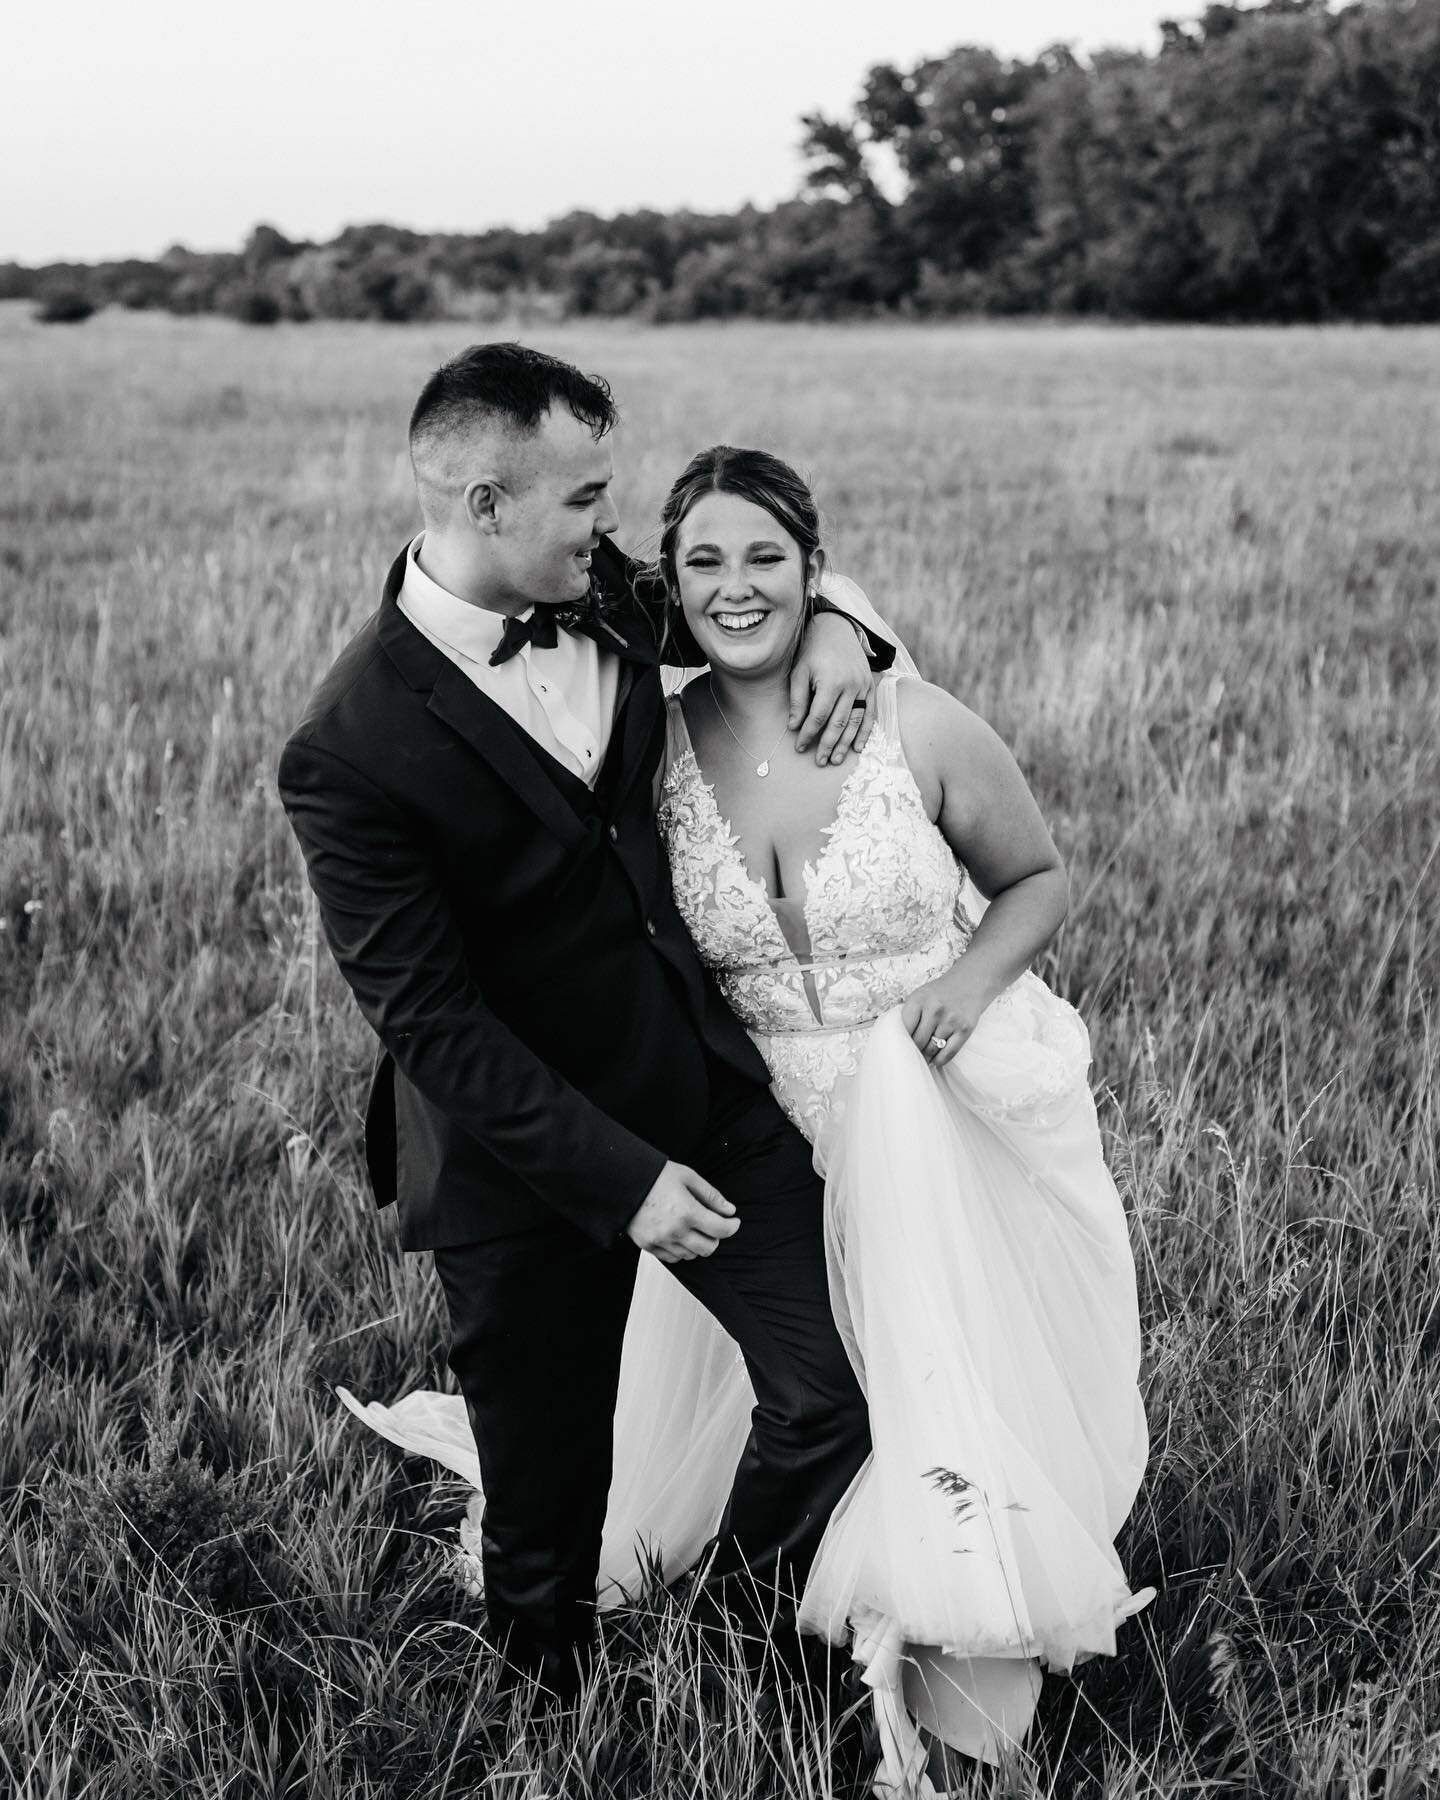 Even though this wedding had some of the most vibrant and beautiful flowers, a rare gloomy Kansas summer day calls for some black and white photos